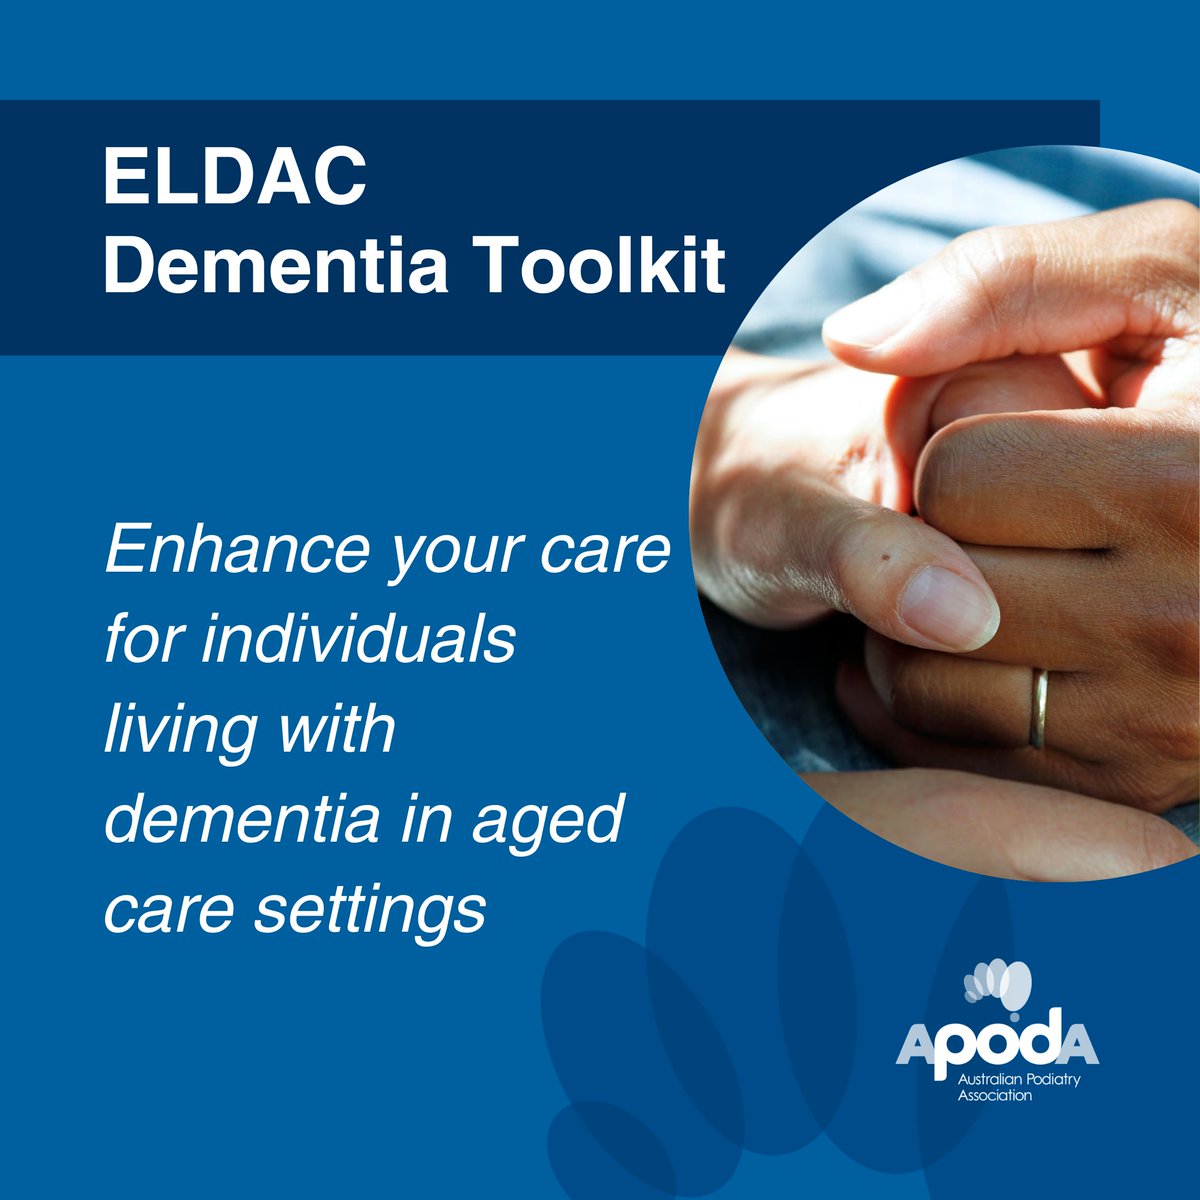 Improve care for individuals living with dementia and their families, with the @ELDAC_agedcare Dementia Toolkit 👉 eldac.com.au/Toolkits/Demen…